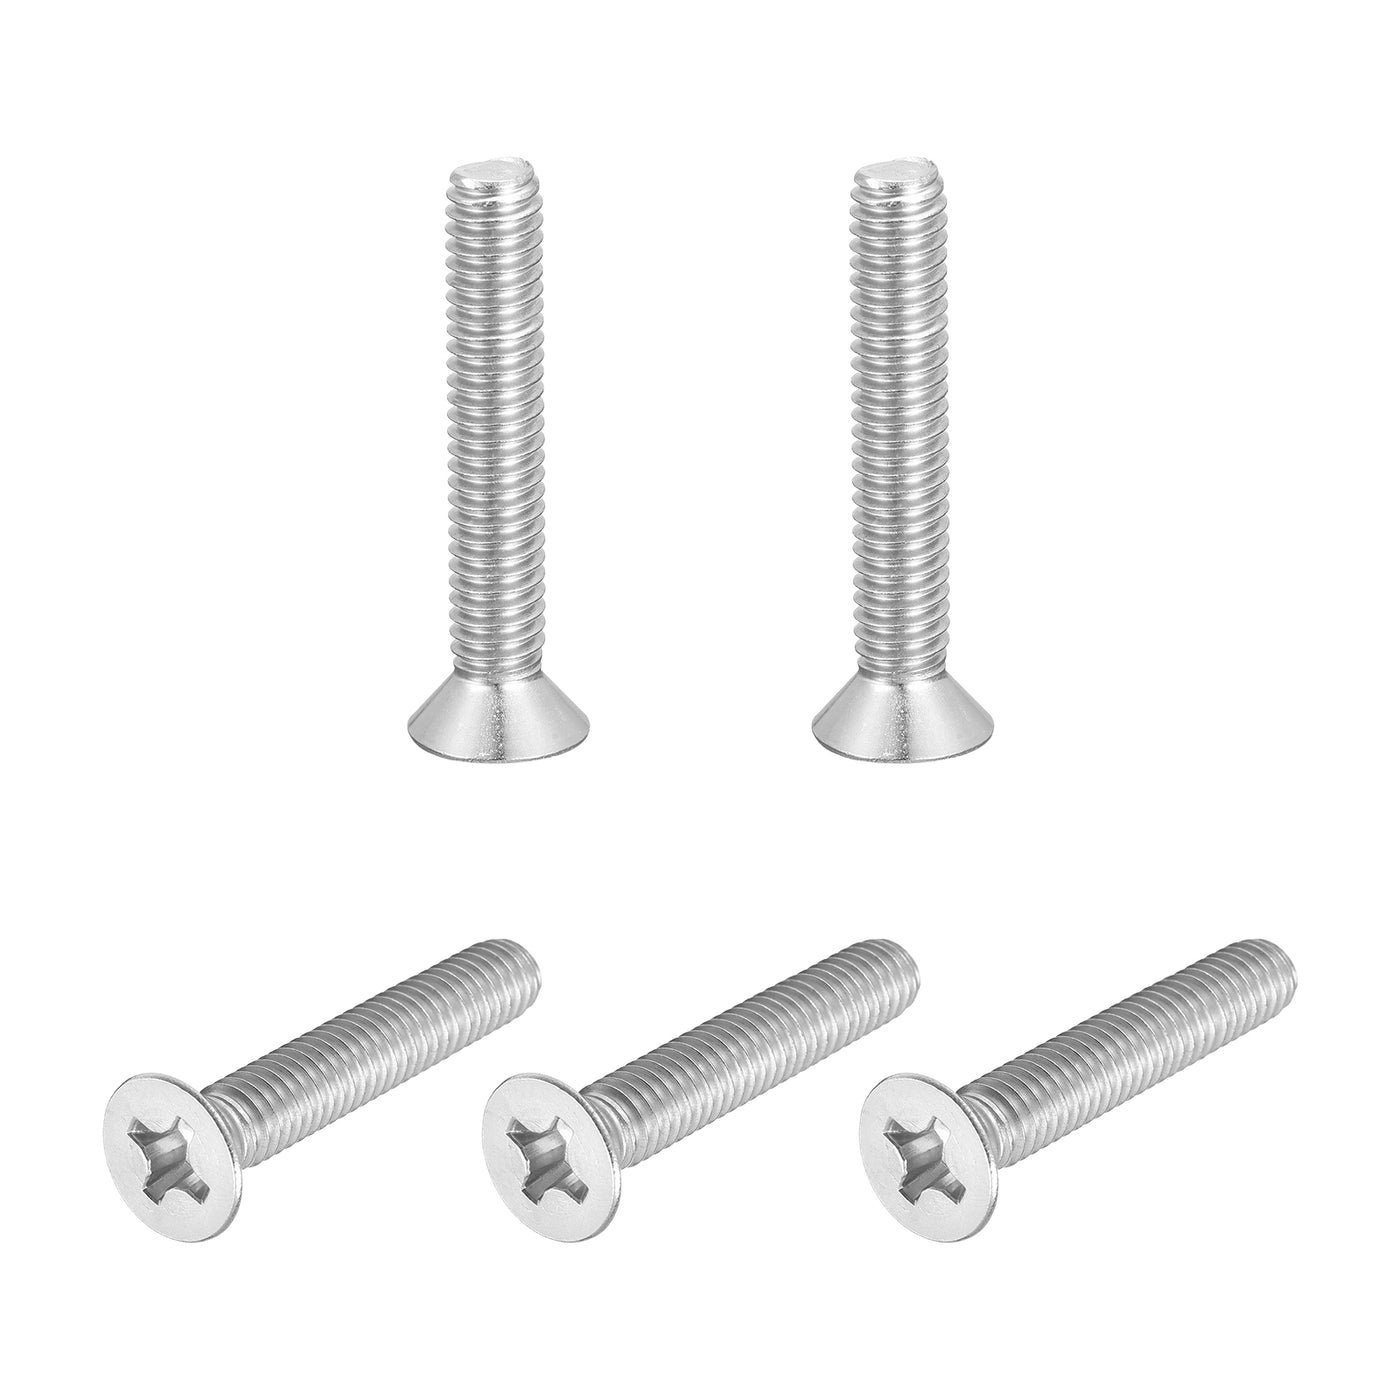 uxcell Uxcell 5/16-18x2" Flat Head Machine Screws Phillips 304 Stainless Steel Bolts 5pcs